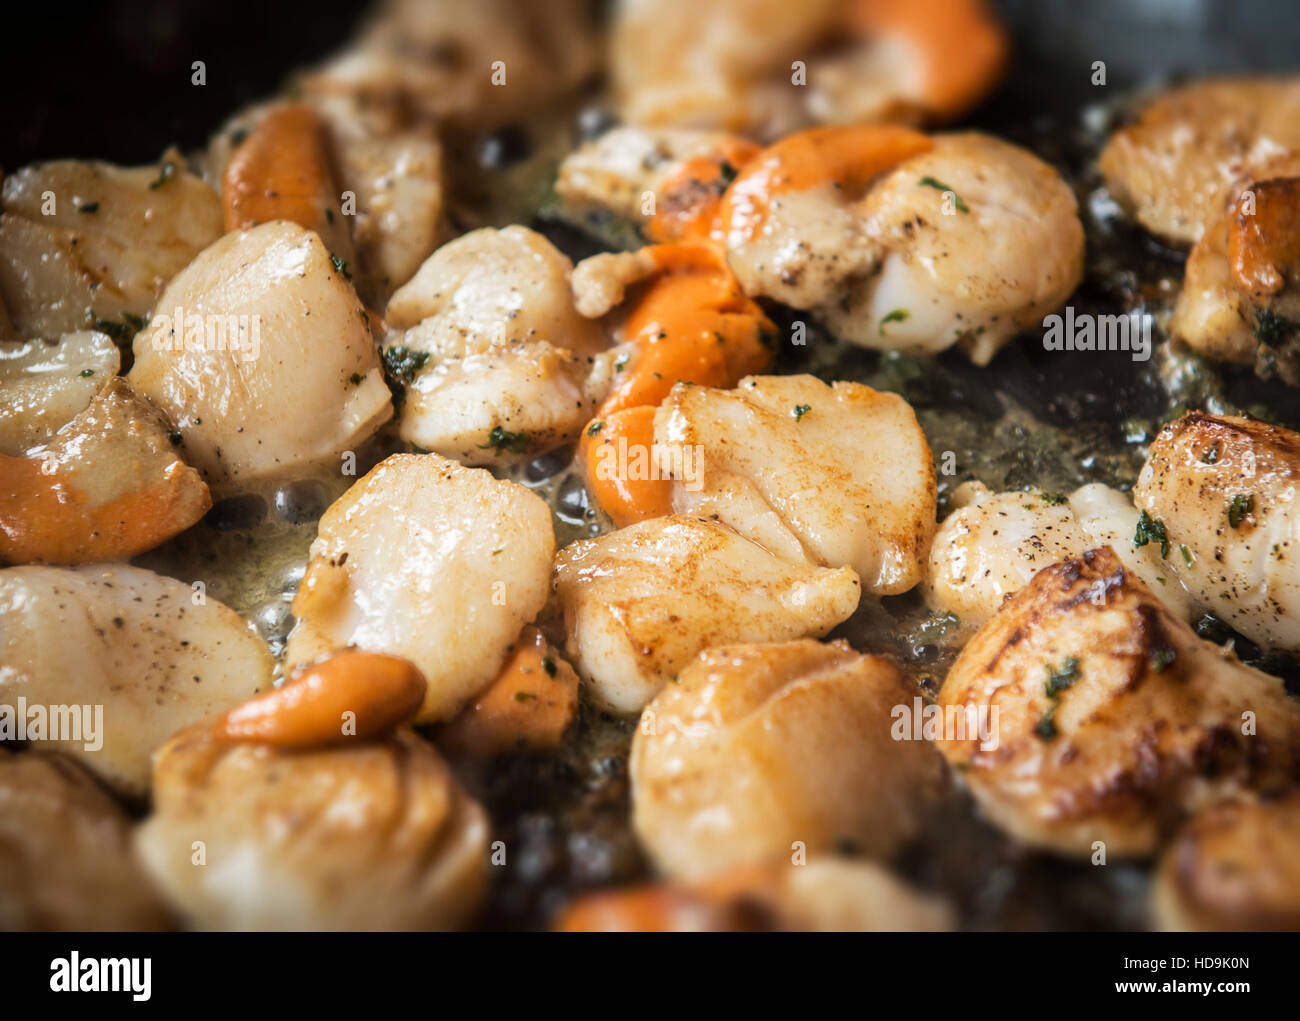 Simple grilled scallops and coral recipe cooked with butter and parsley, Close up with depth of field effect. Horizontal image. Stock Photo